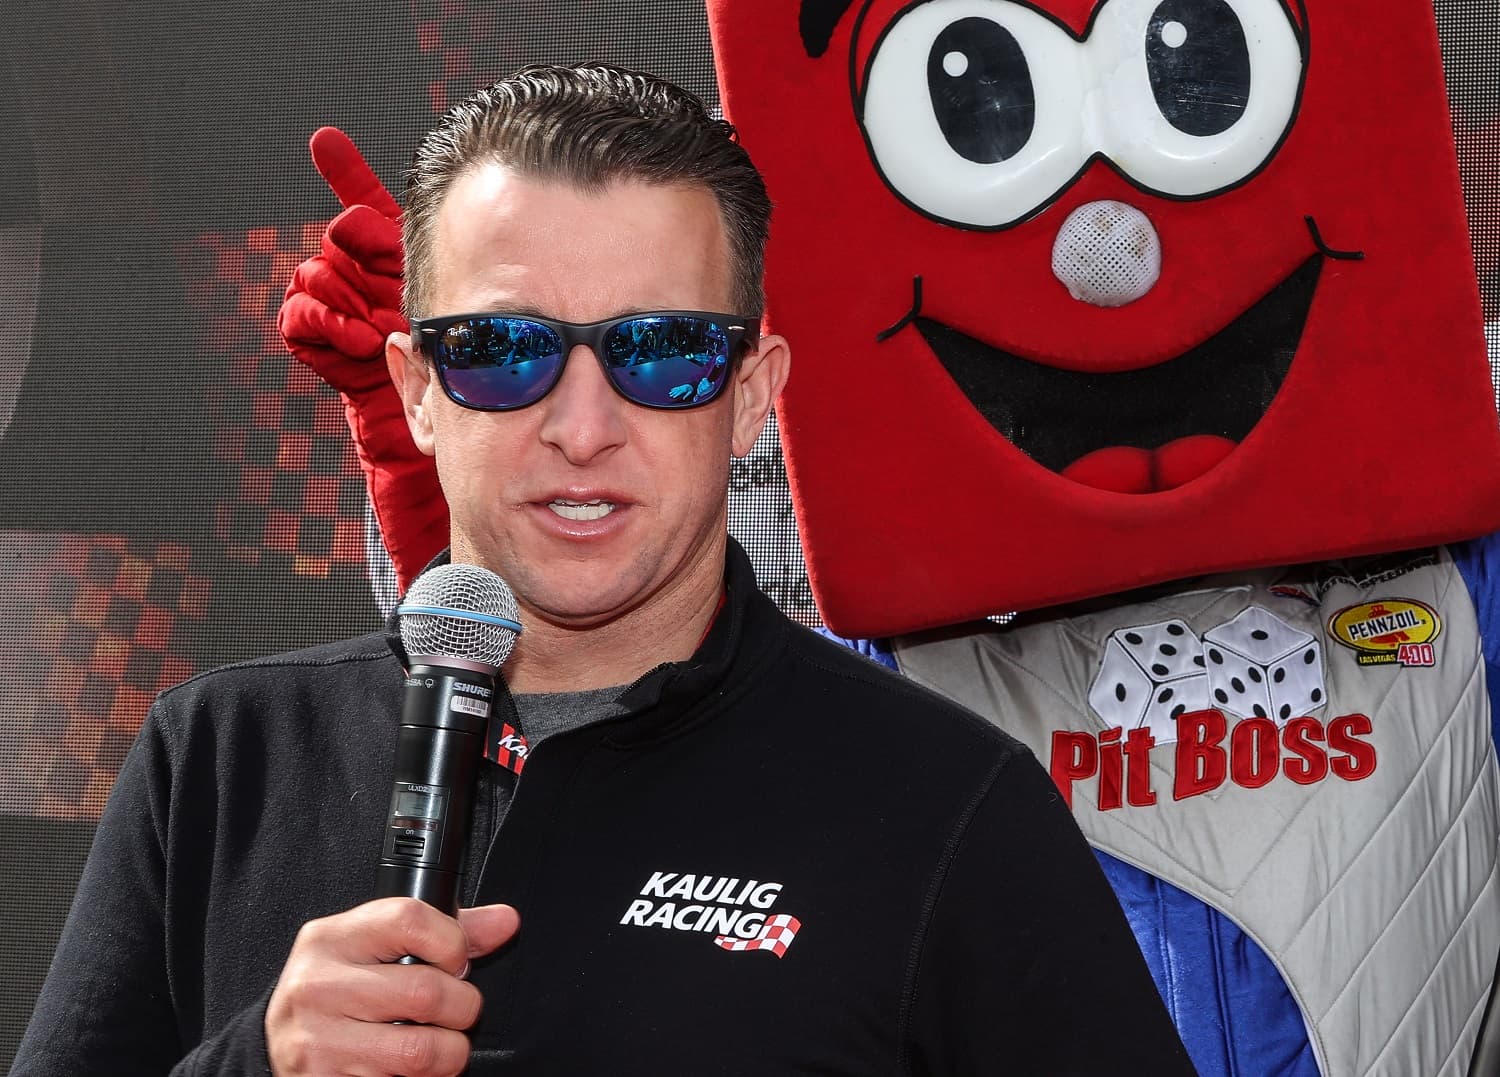 AJ Allmendinger in the NASCAR fan zone prior to the Cup Series Pennzoil 400 on March 5, 2023, at Las Vegas Motor Speedway. | Christopher Trim/Icon Sportswire via Getty Images